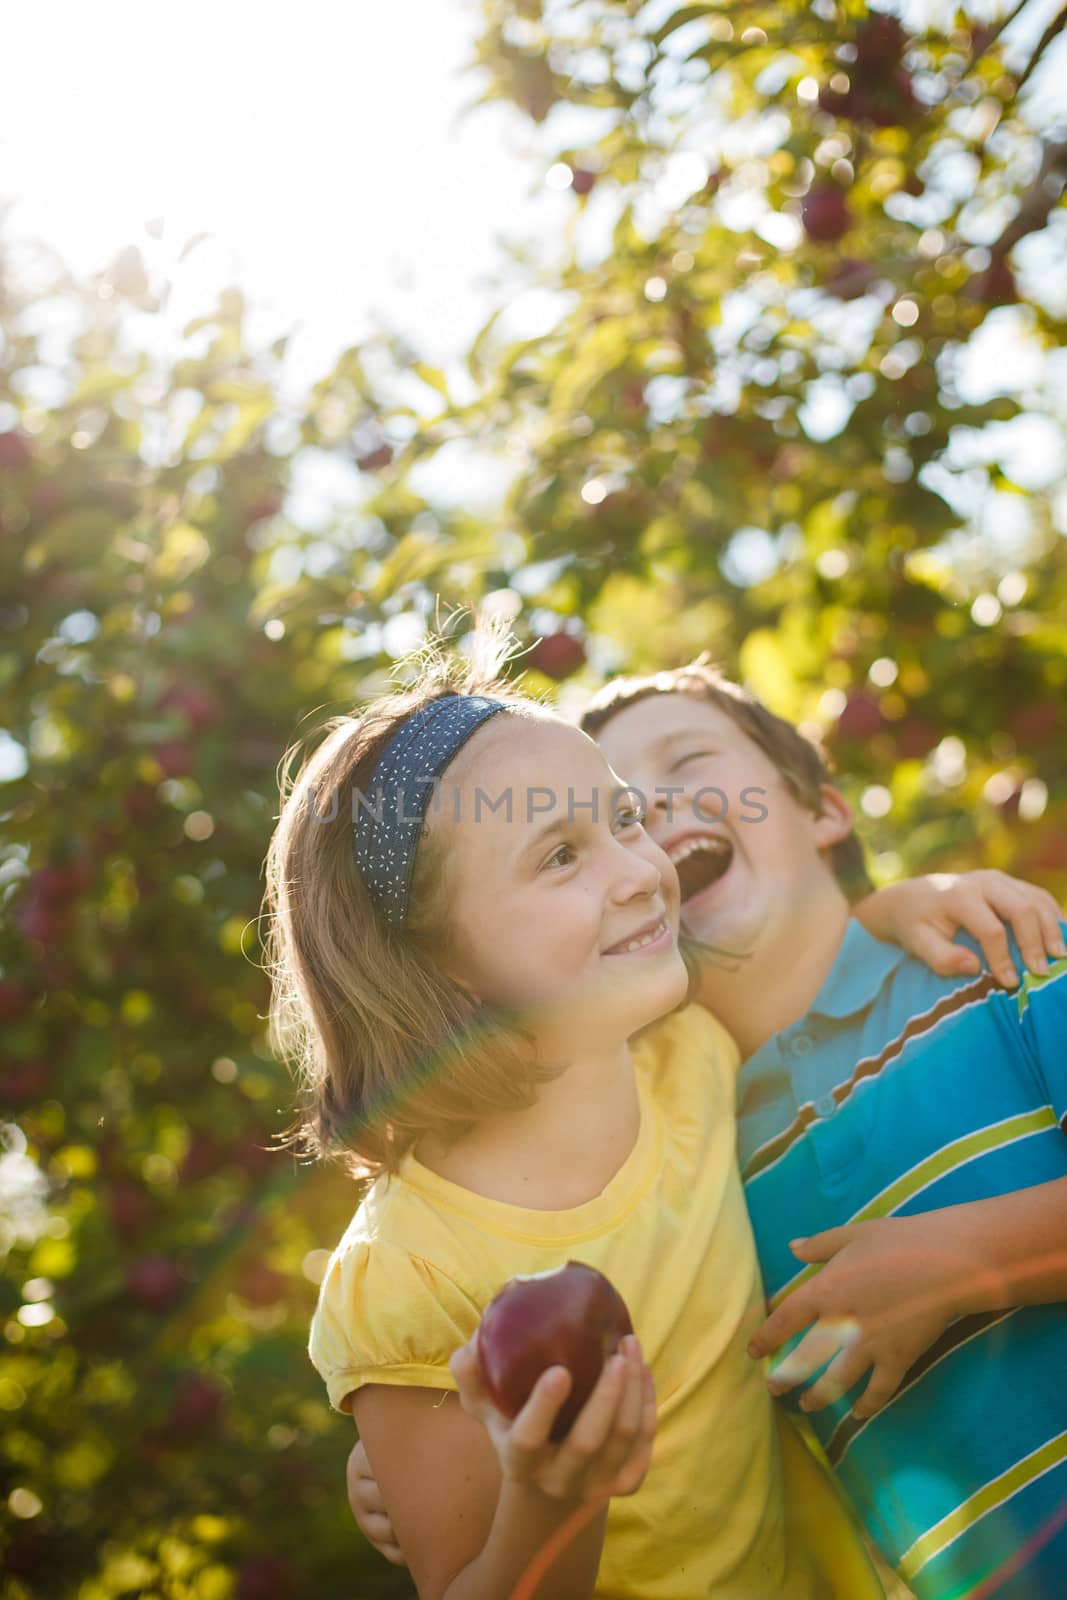 Brother and sister laughing and eating apples in an orchard